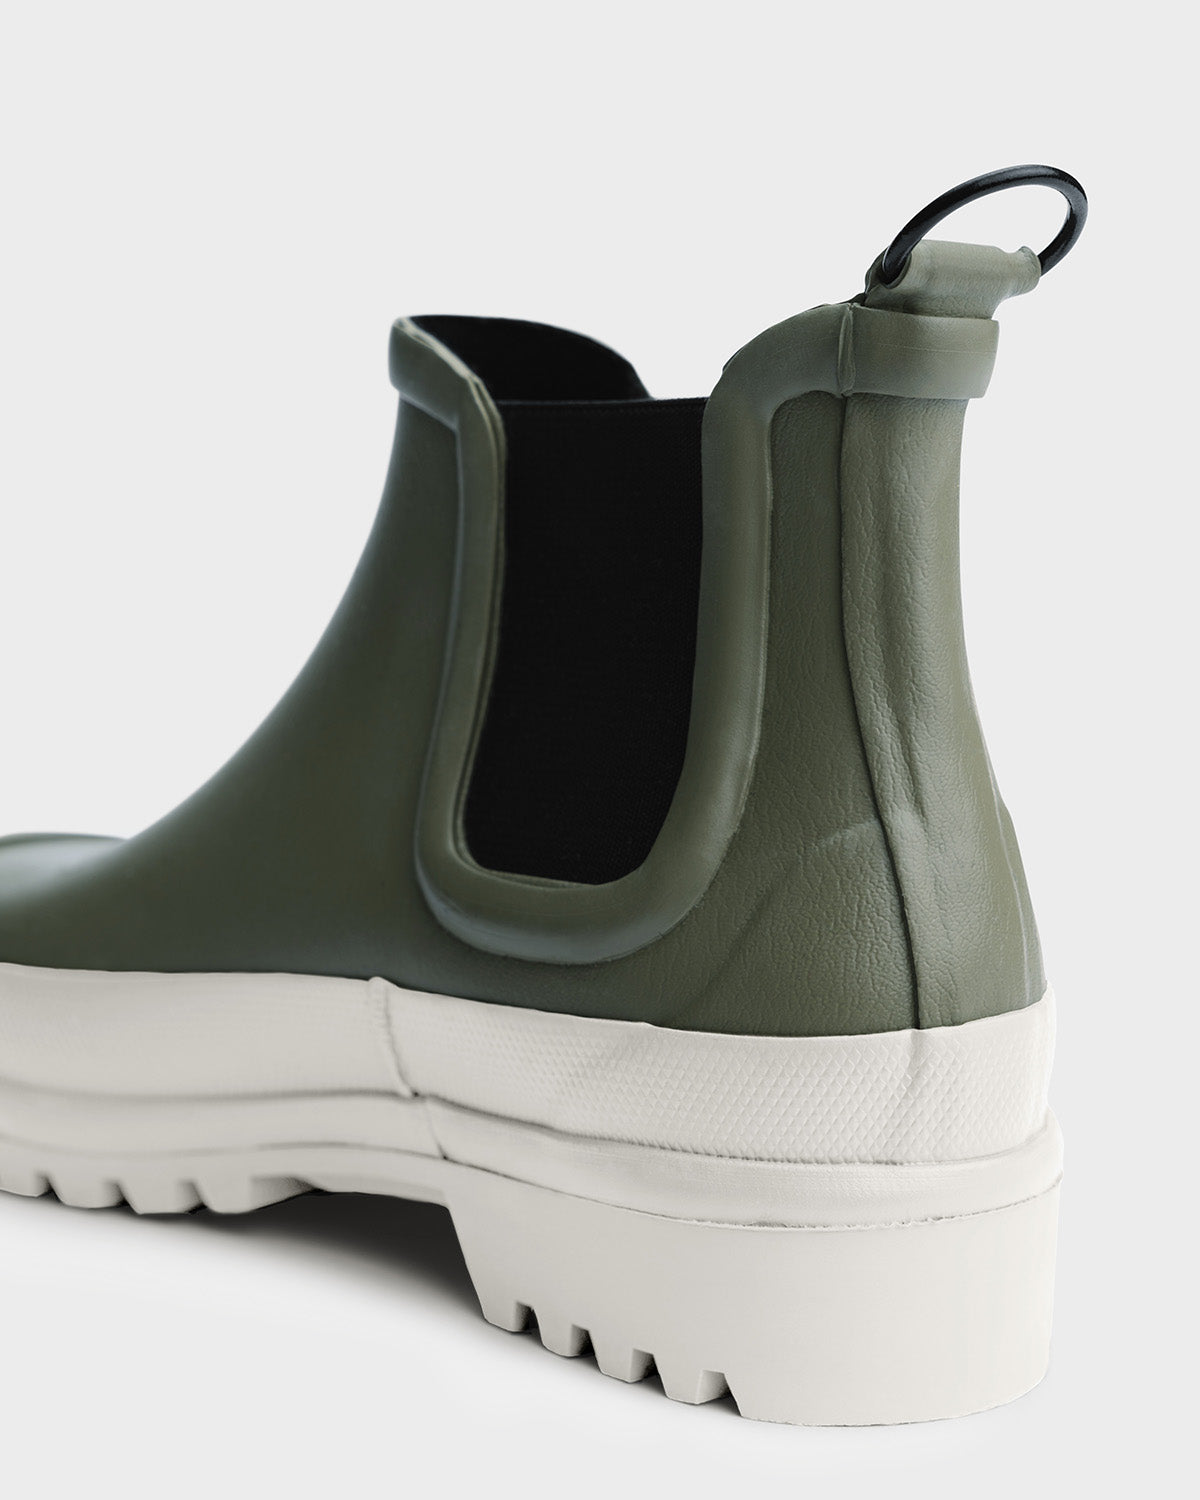 Chelsea Rainboots in color army with white sole by Ilse Jacobsen